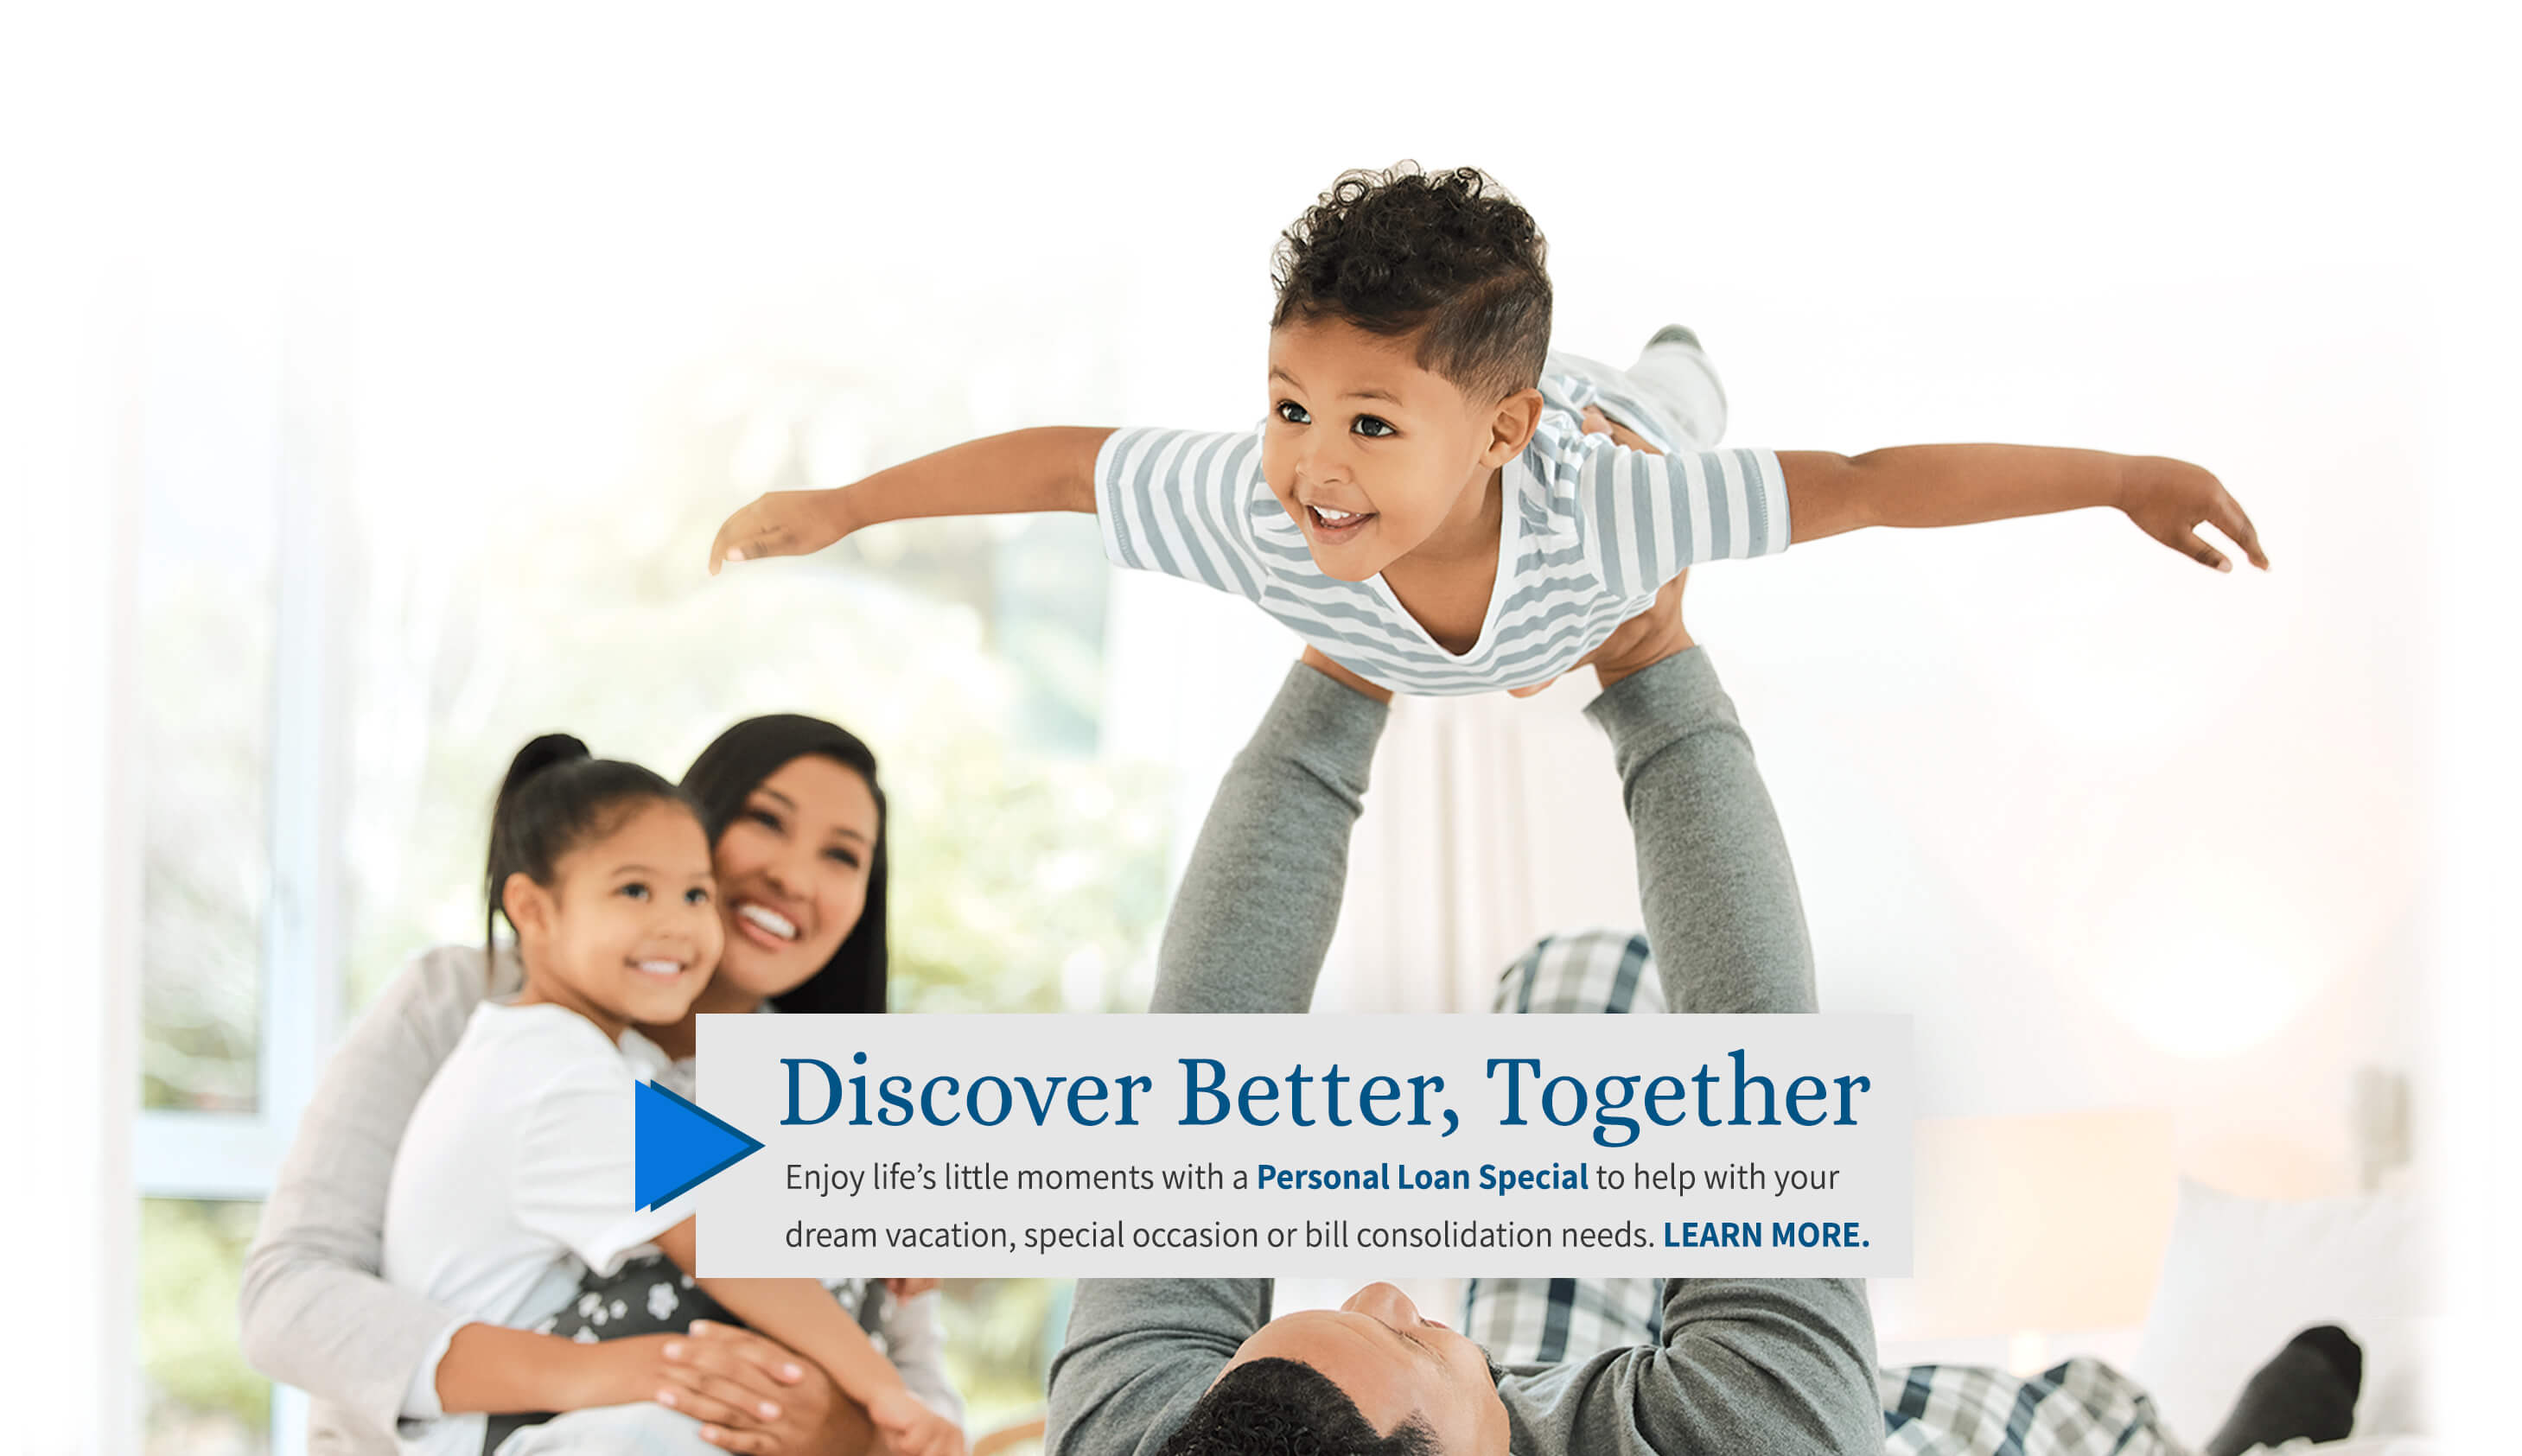 Discover Better, Together. Enjoy life's little moments with a Personal Loan Special to help with your dream vacation, special occasion, or bill consolidation needs. Learn more. 